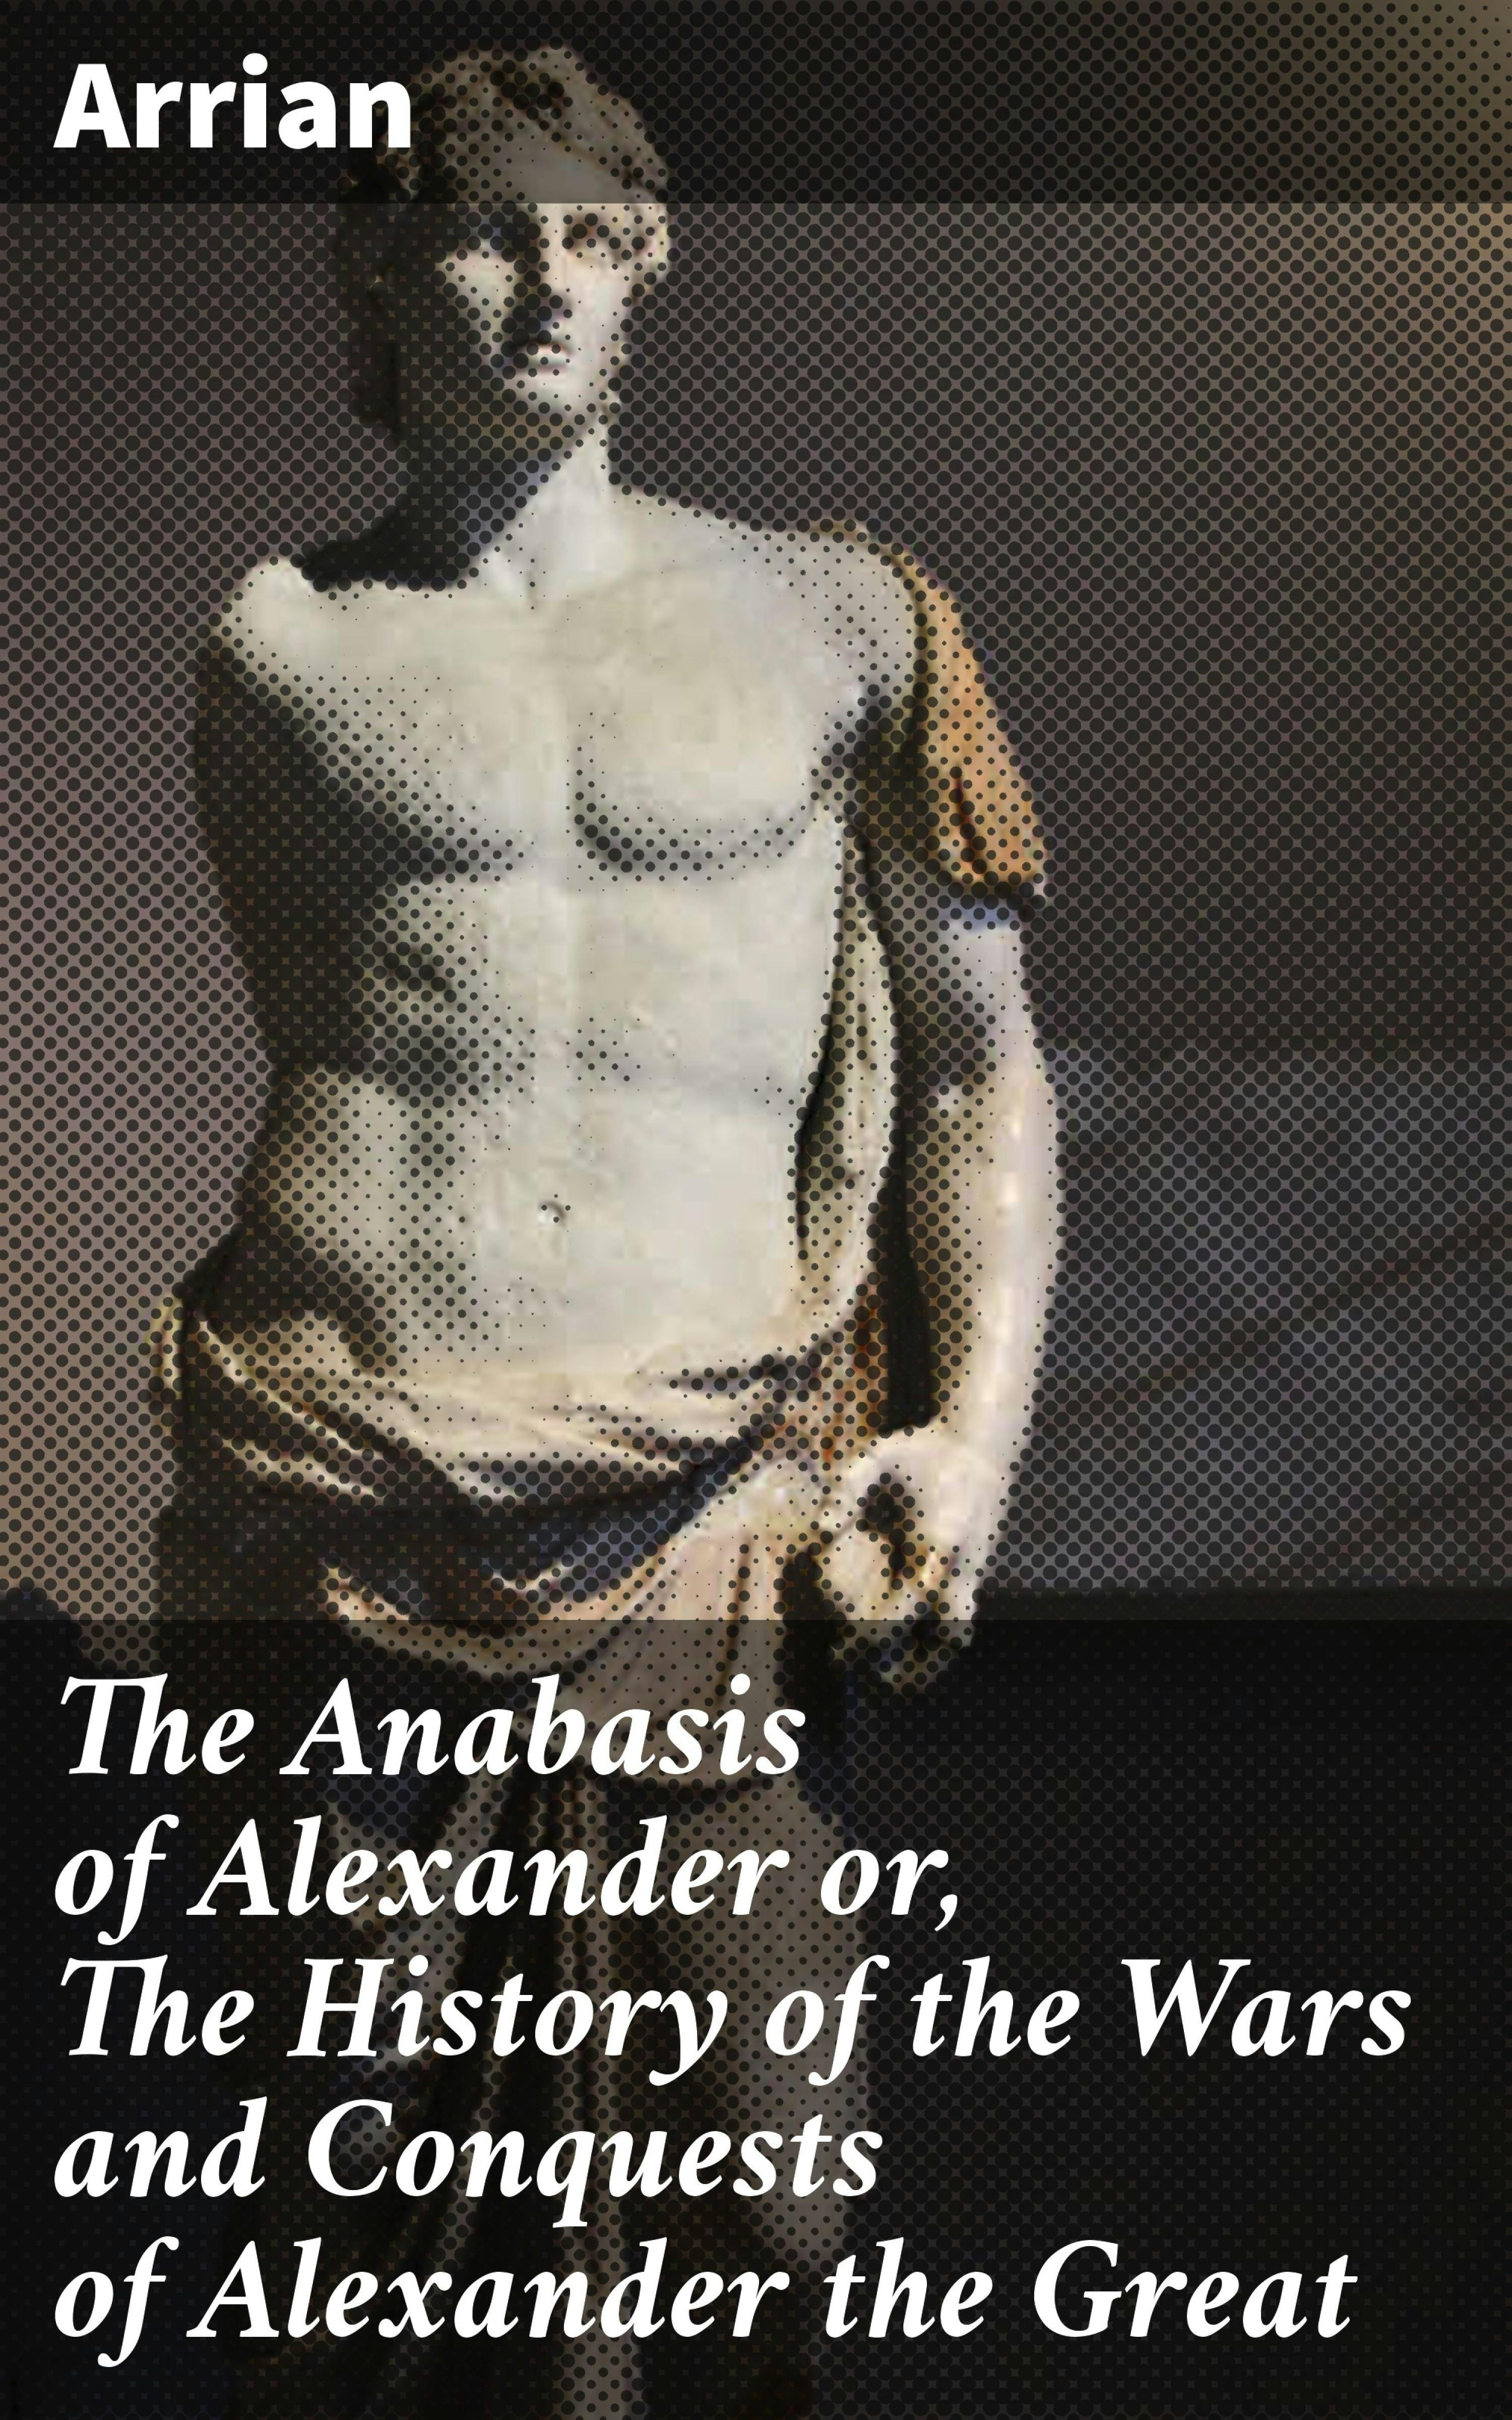 The Anabasis of Alexander or, The History of the Wars and Conquests of Alexander the Great - undefined